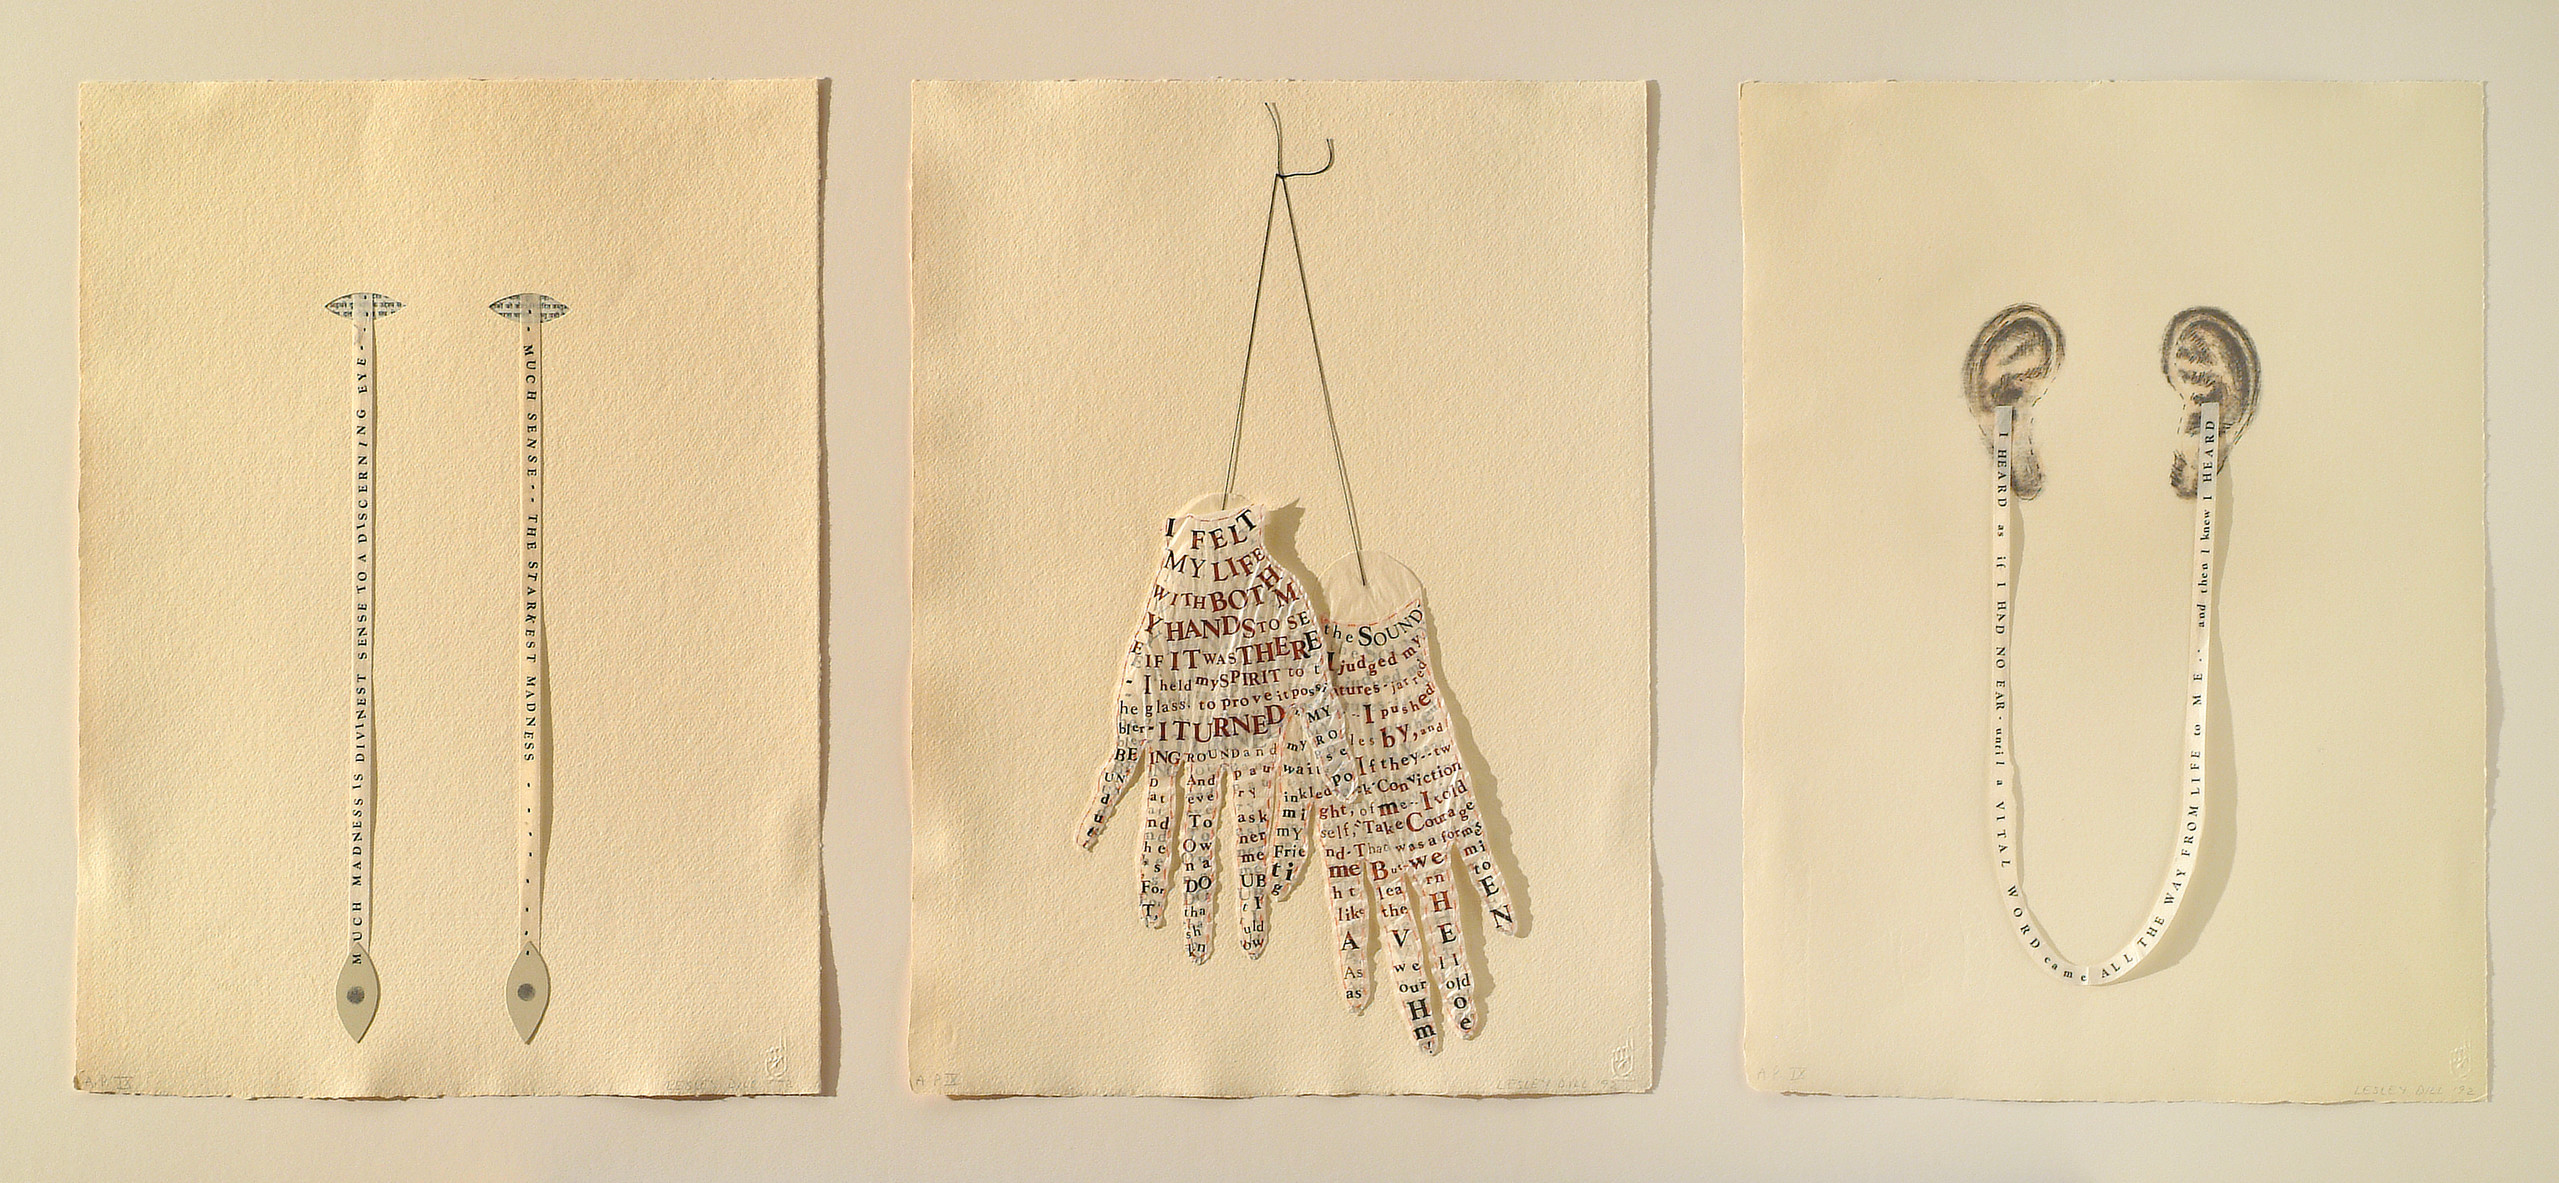 Three side-by-side works on vanilla-colored paper features eyes, hands and ears with words printed on them.